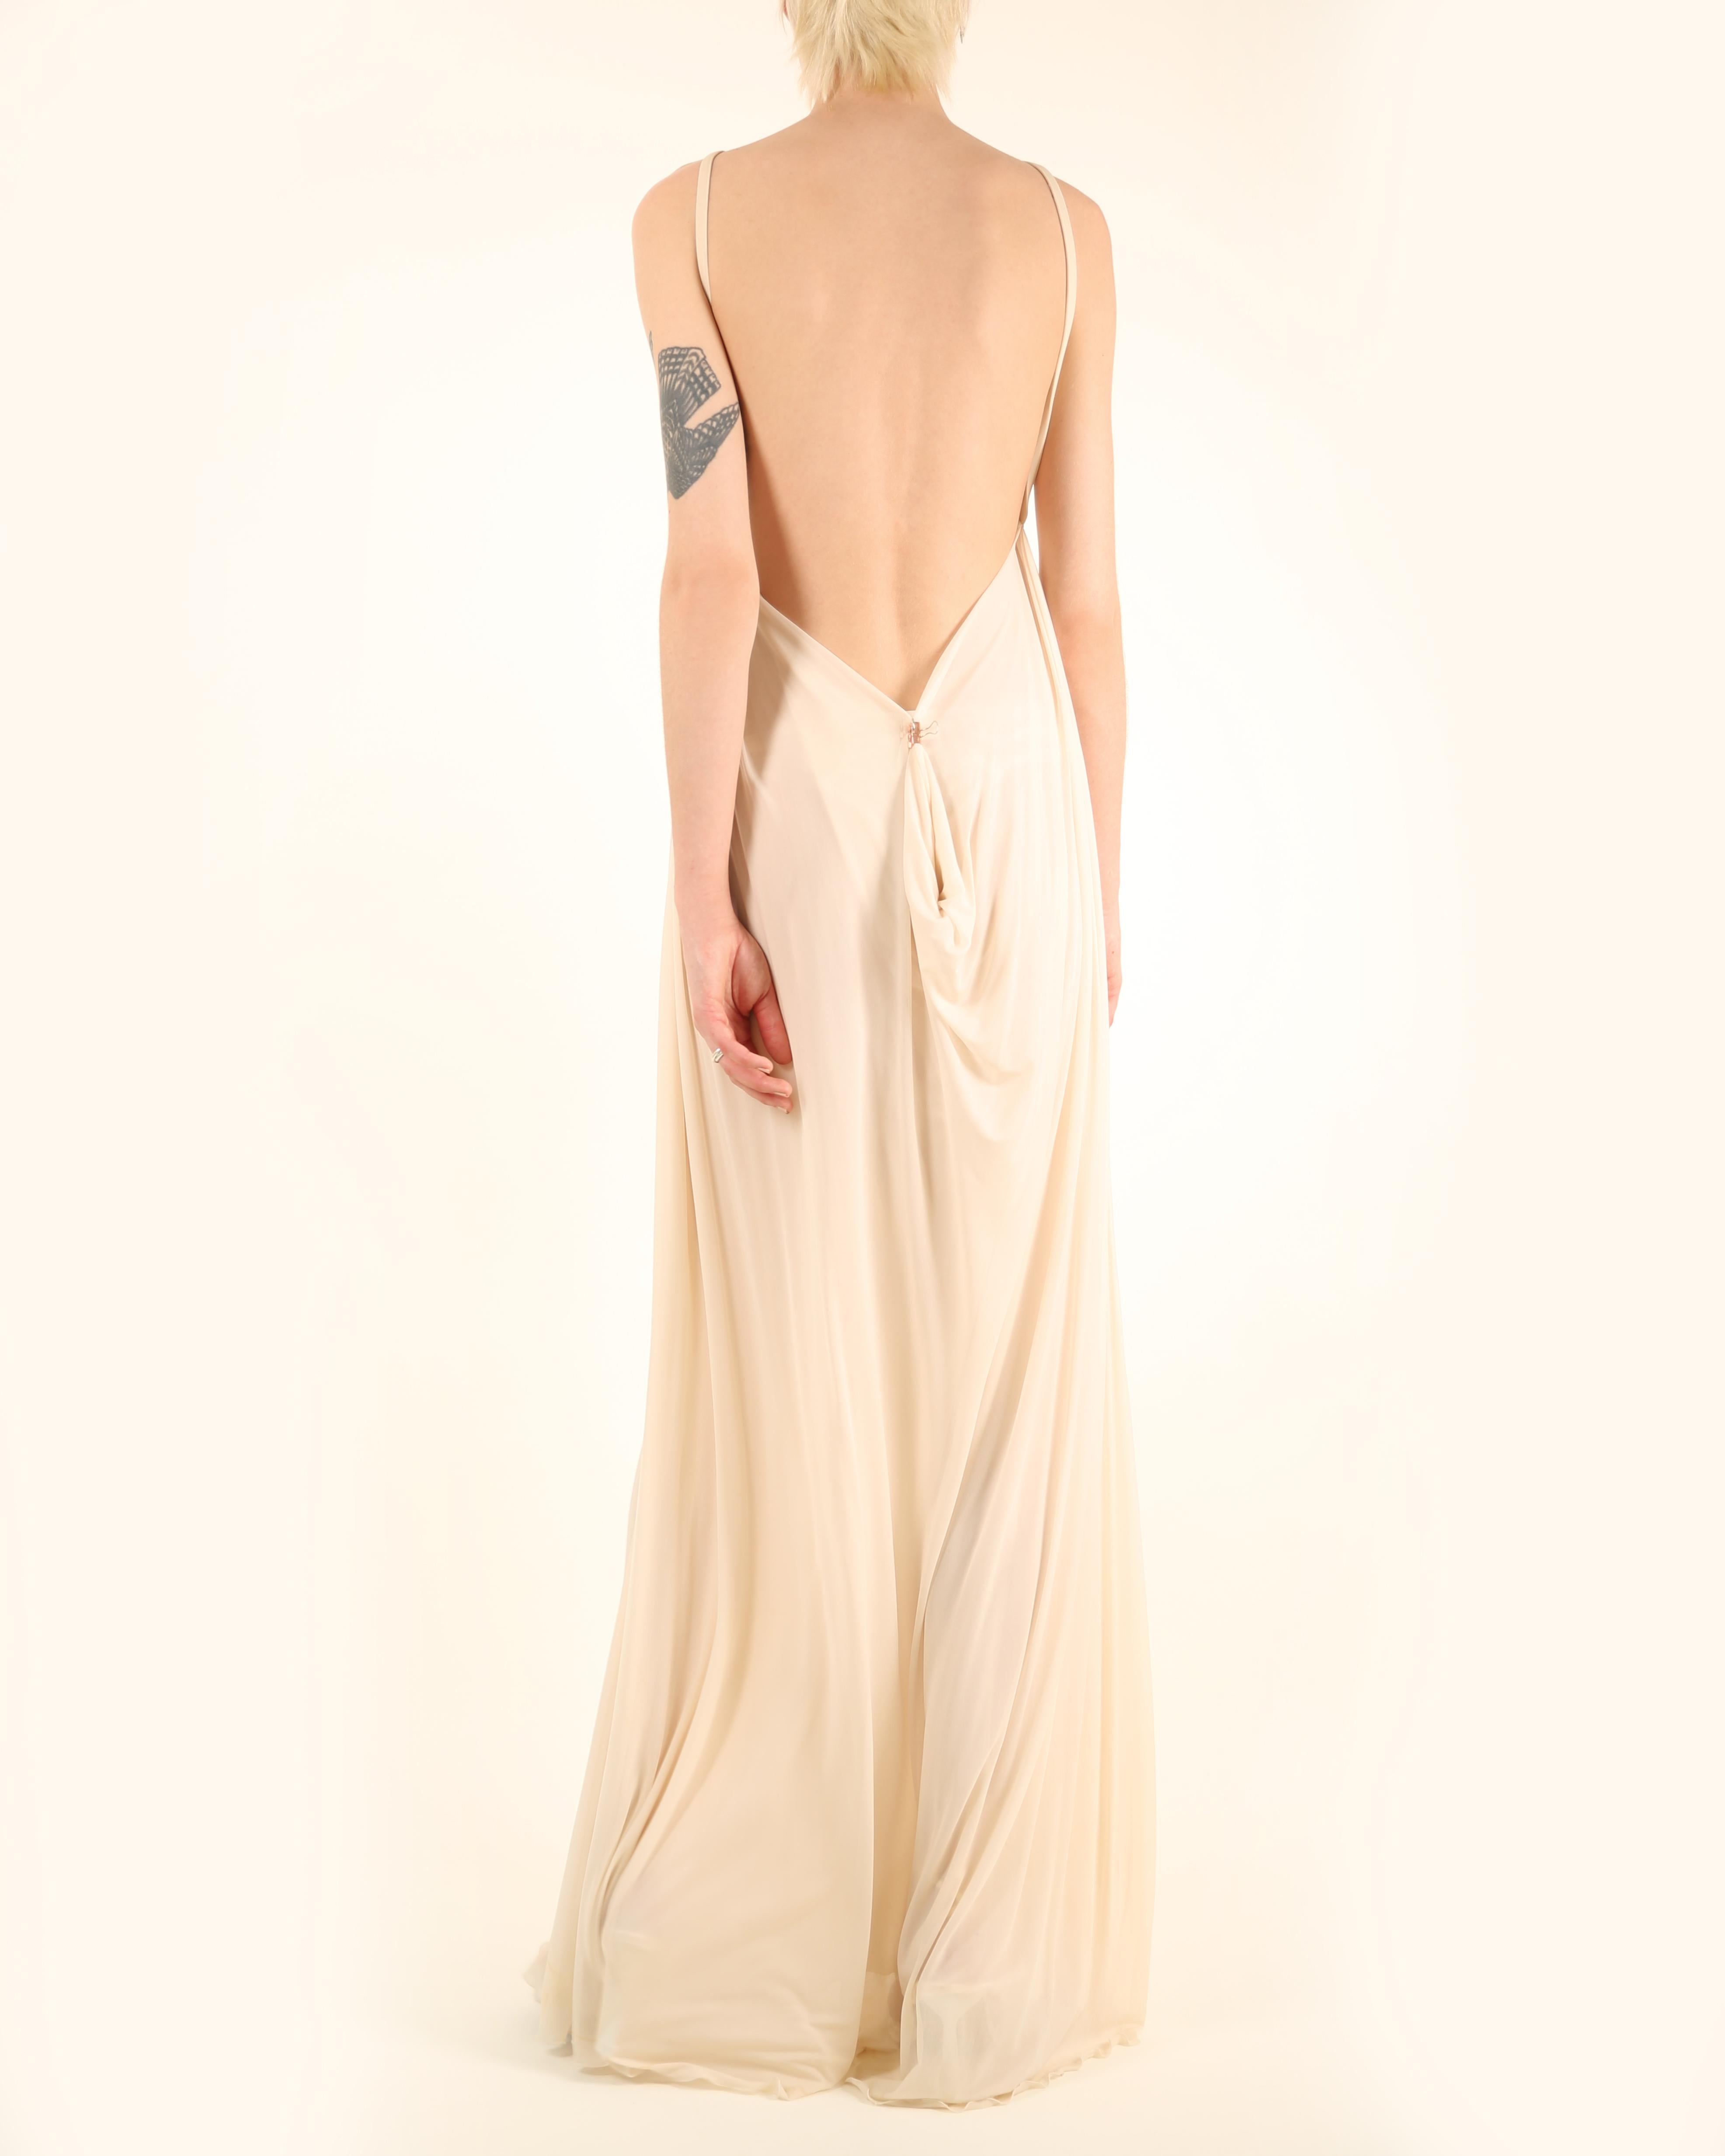 Halston 09 ivory cream plisse grecian style backless wedding maxi dress gown 42 For Sale 1